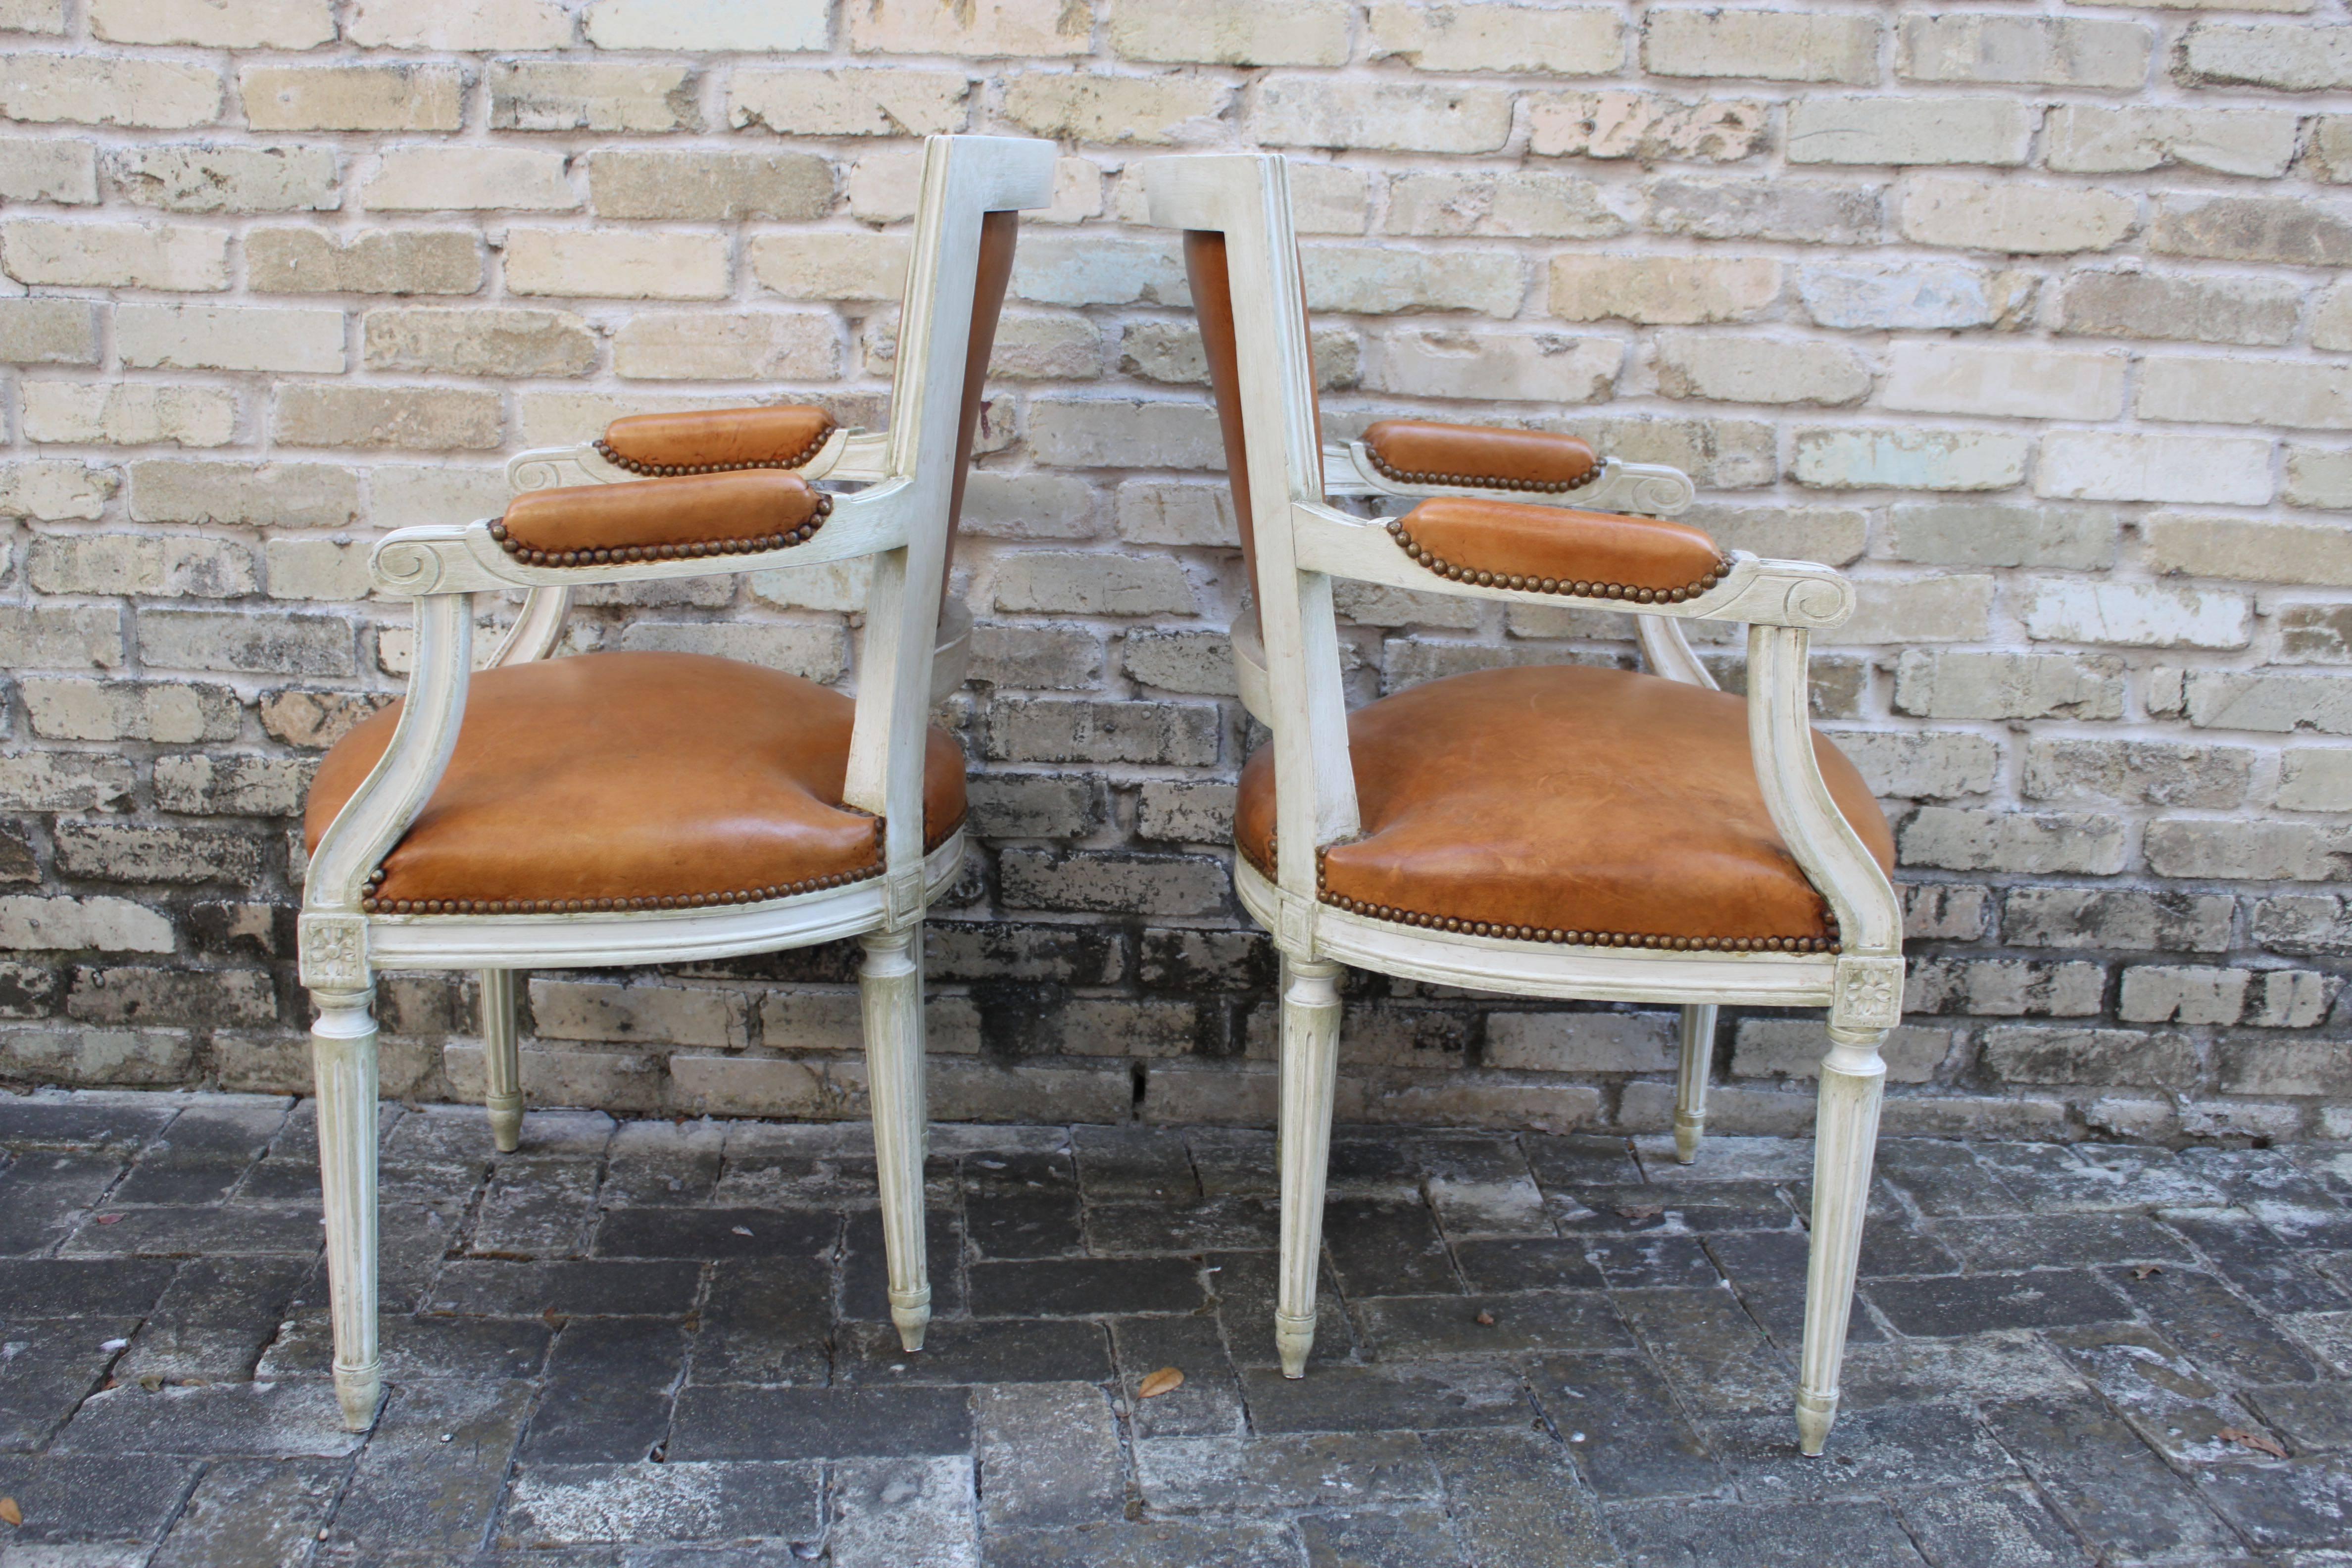 Pair of Armchairs or Fauteuils with Leather Upholstery in Louis XVI Style In Fair Condition For Sale In San Antonio, TX